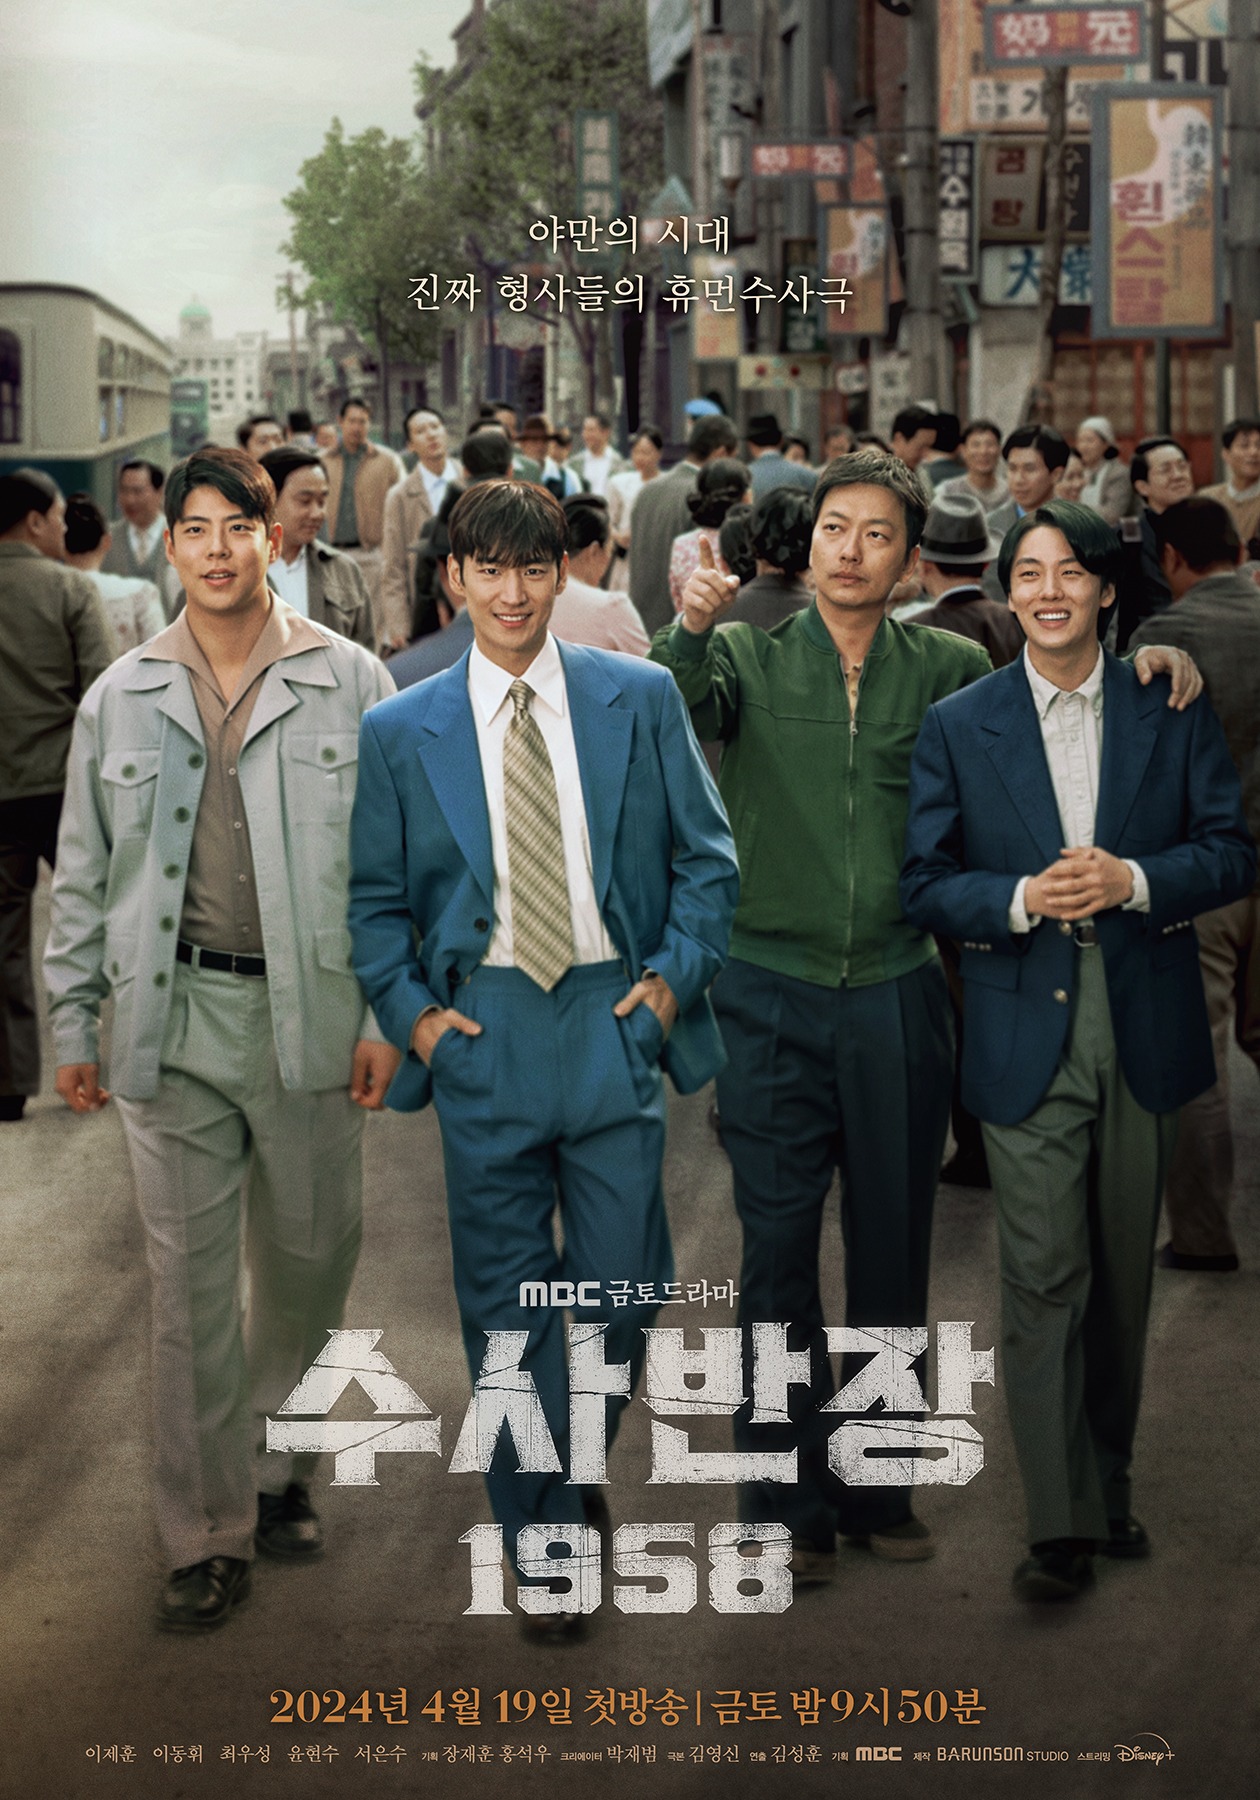 Lee Je Hoon, Lee Dong Hwi, And More Transform Into Passionate Detectives In “Chief Detective 1958” Poster